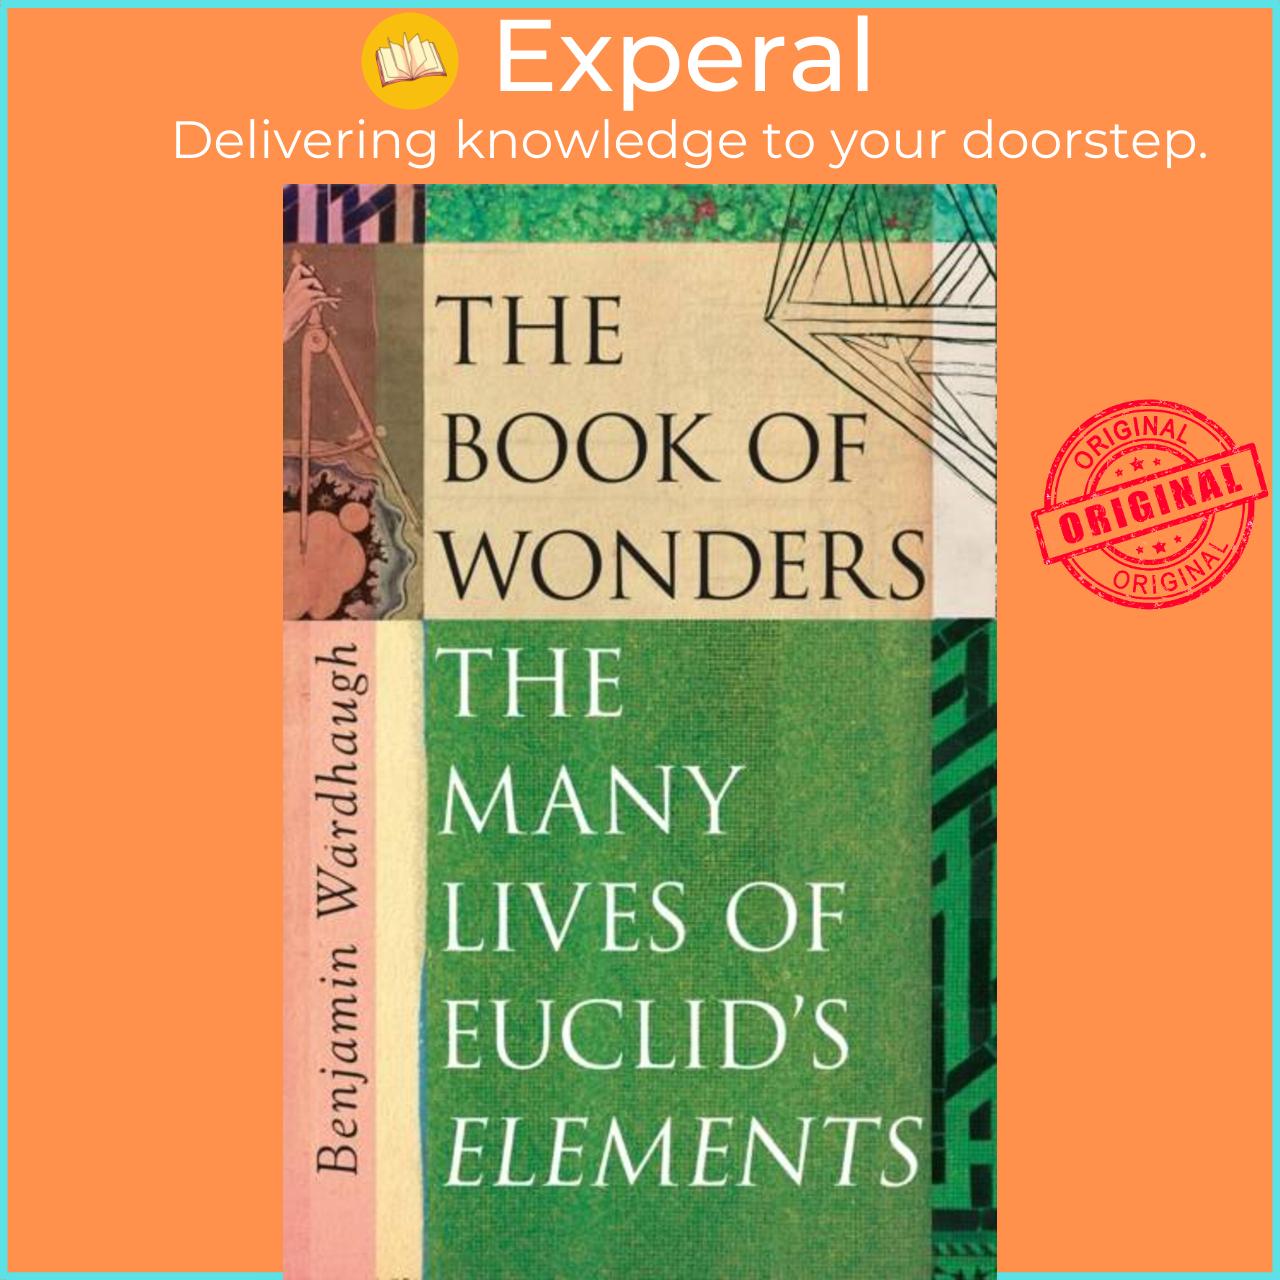 Sách - The Book of ders - The Many Lives of Euclid's Elements by Benjamin Wardhaugh (UK edition, hardcover)